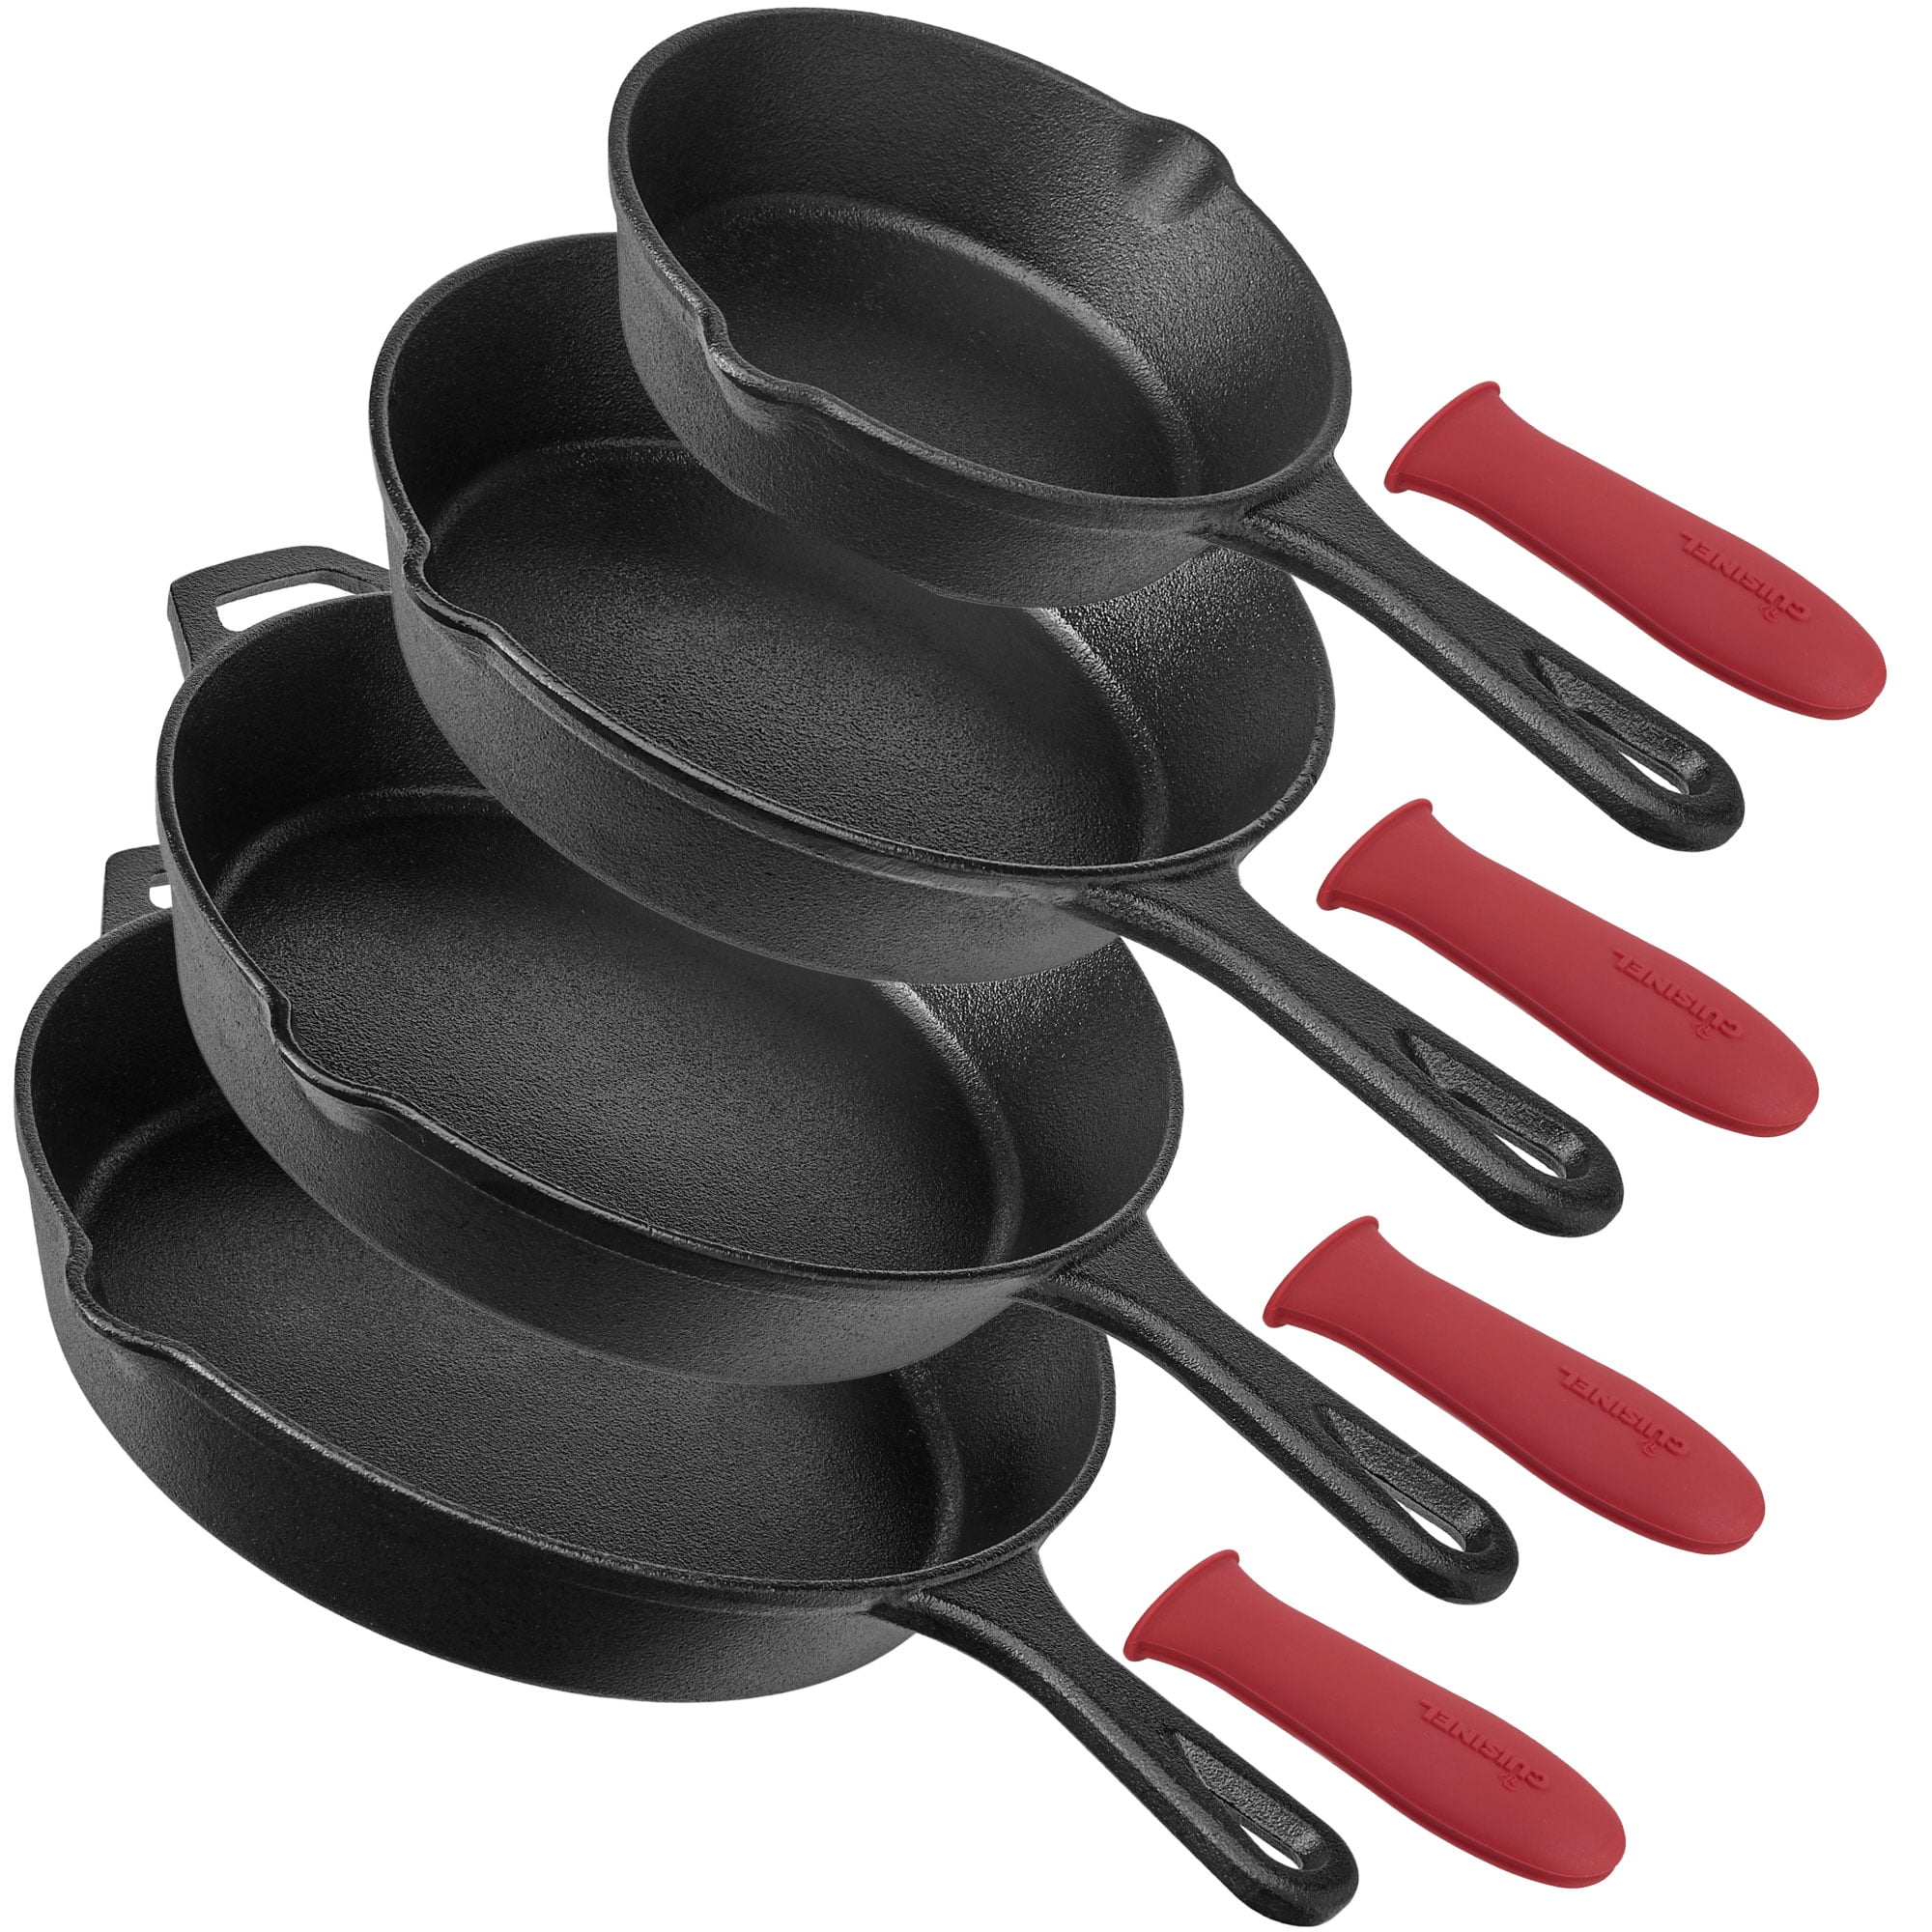 Cuisinel Cast Iron Skillets Frying Pan Set of 3 with Handle Covers